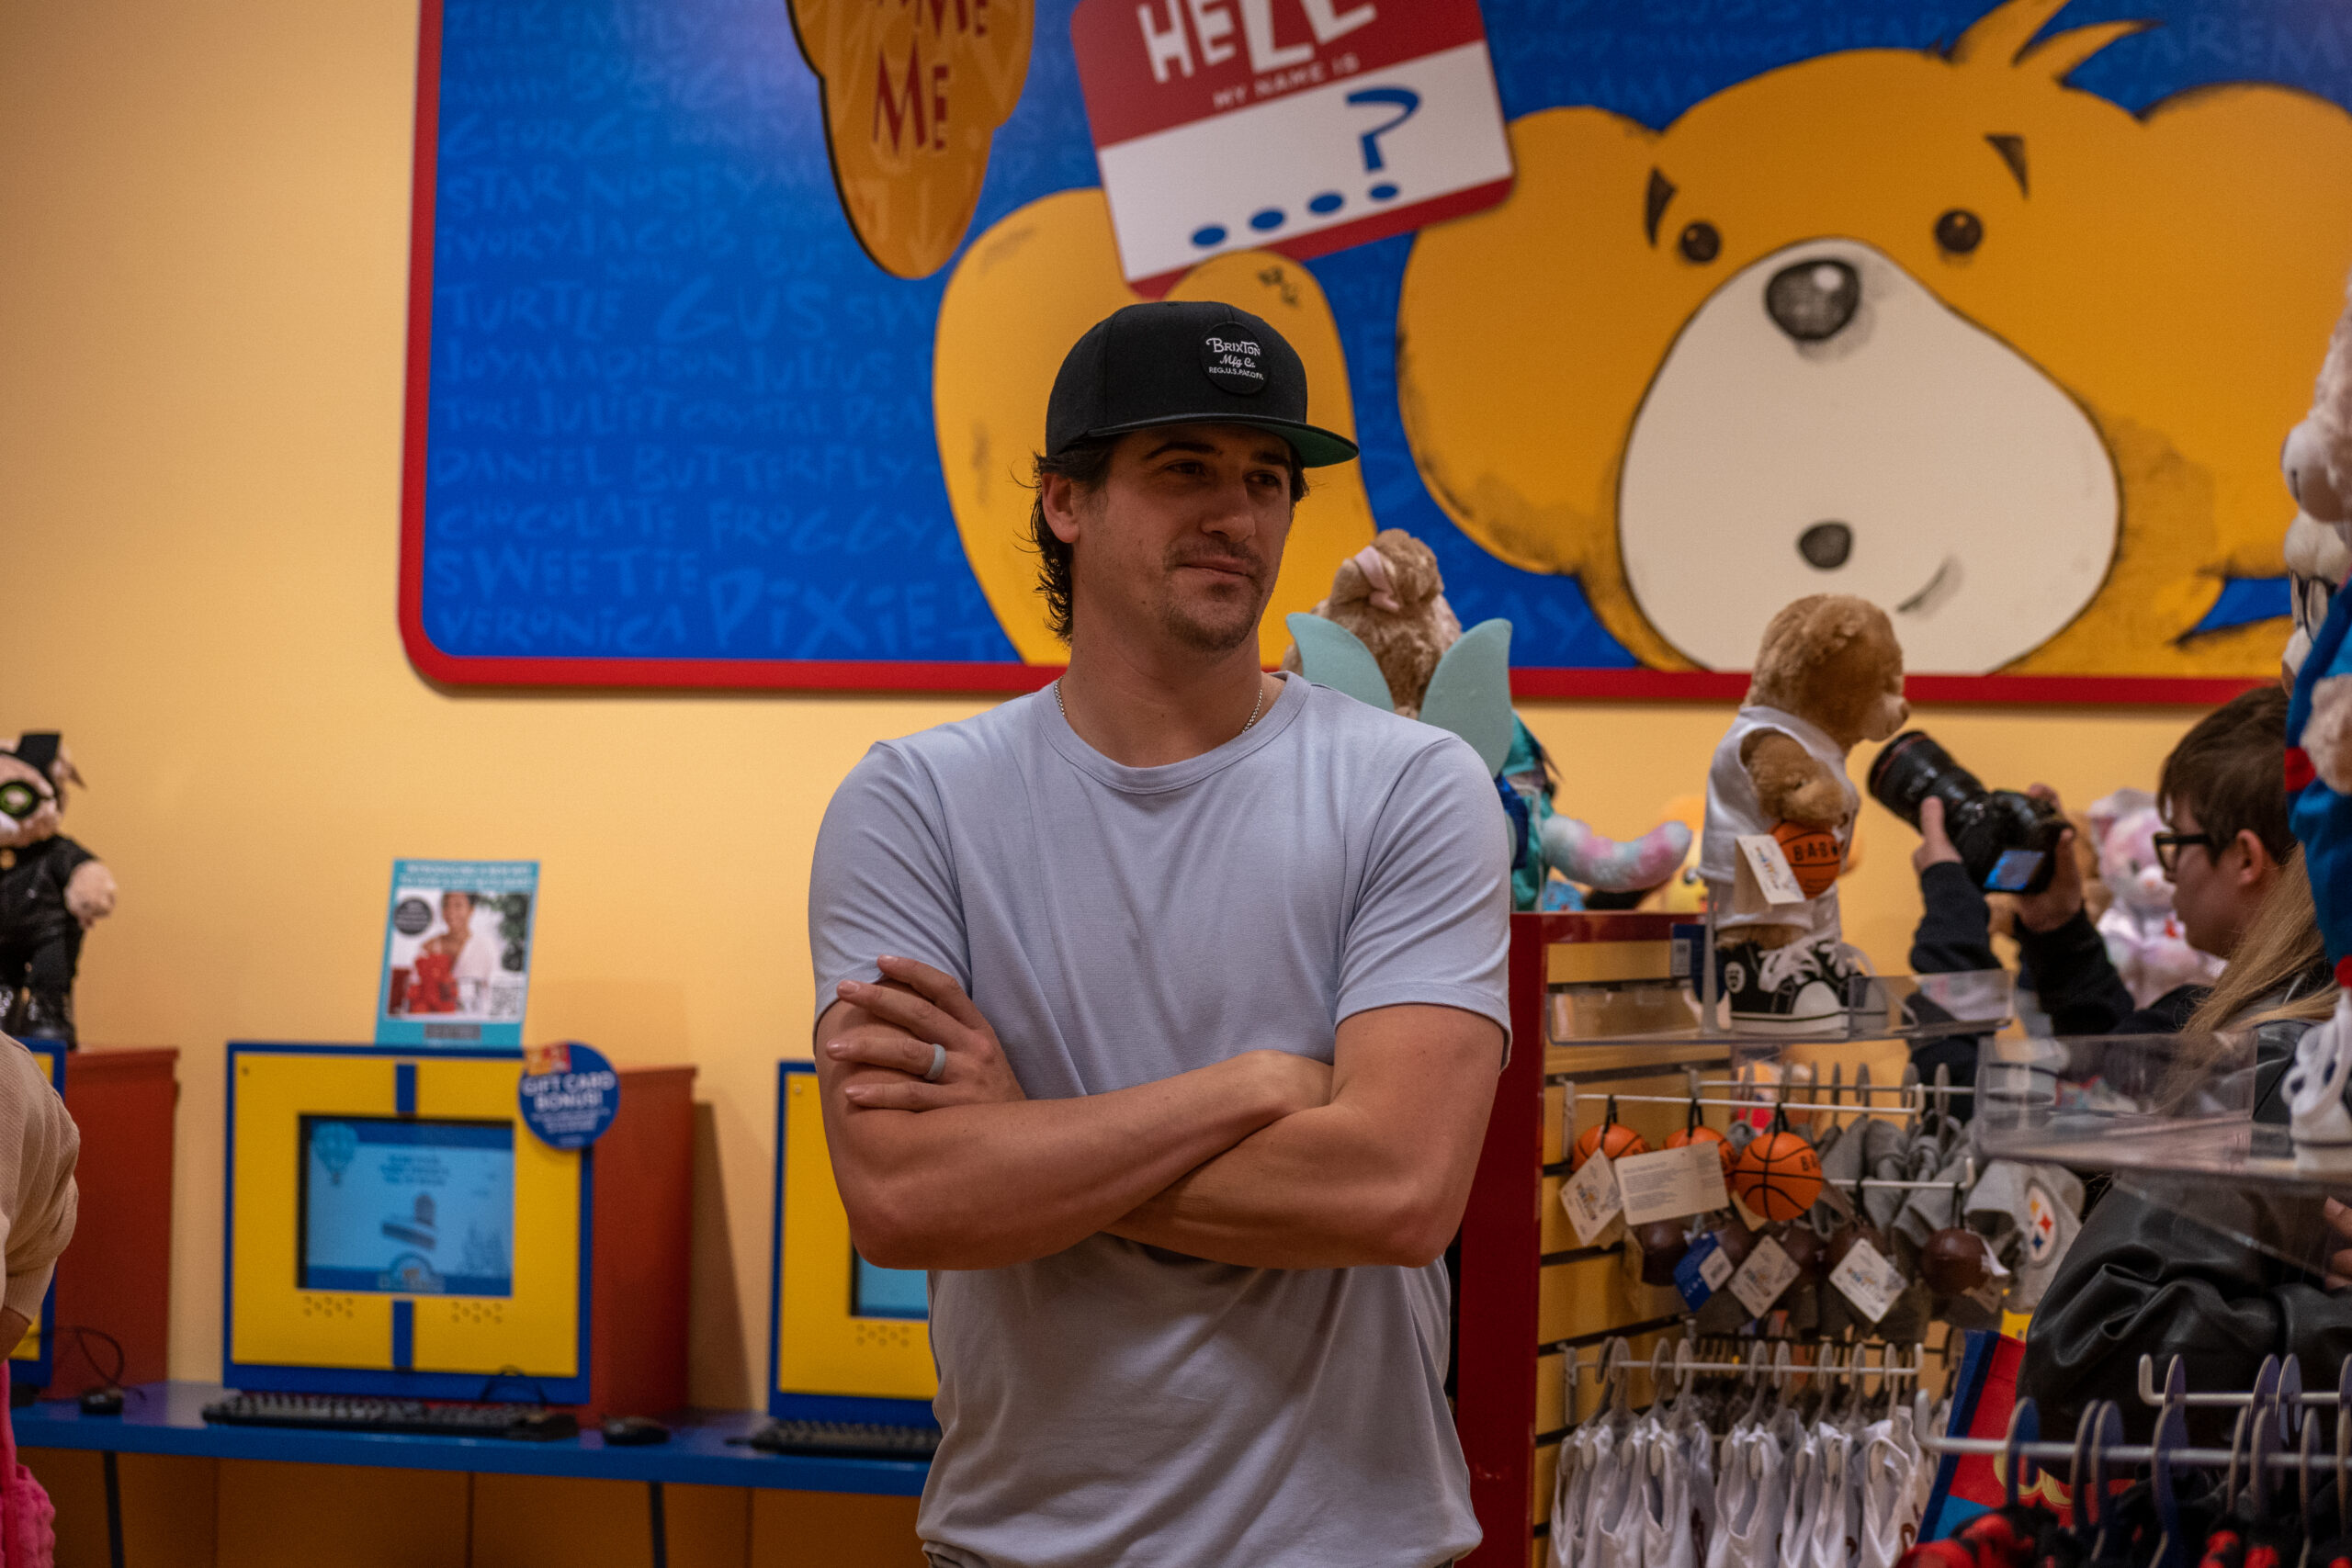 Guardians Pitcher Cal Quantrill And Wife, Eastin, Share Wonderful Day With  OhioGuidestone Kids At Build-a-Bear